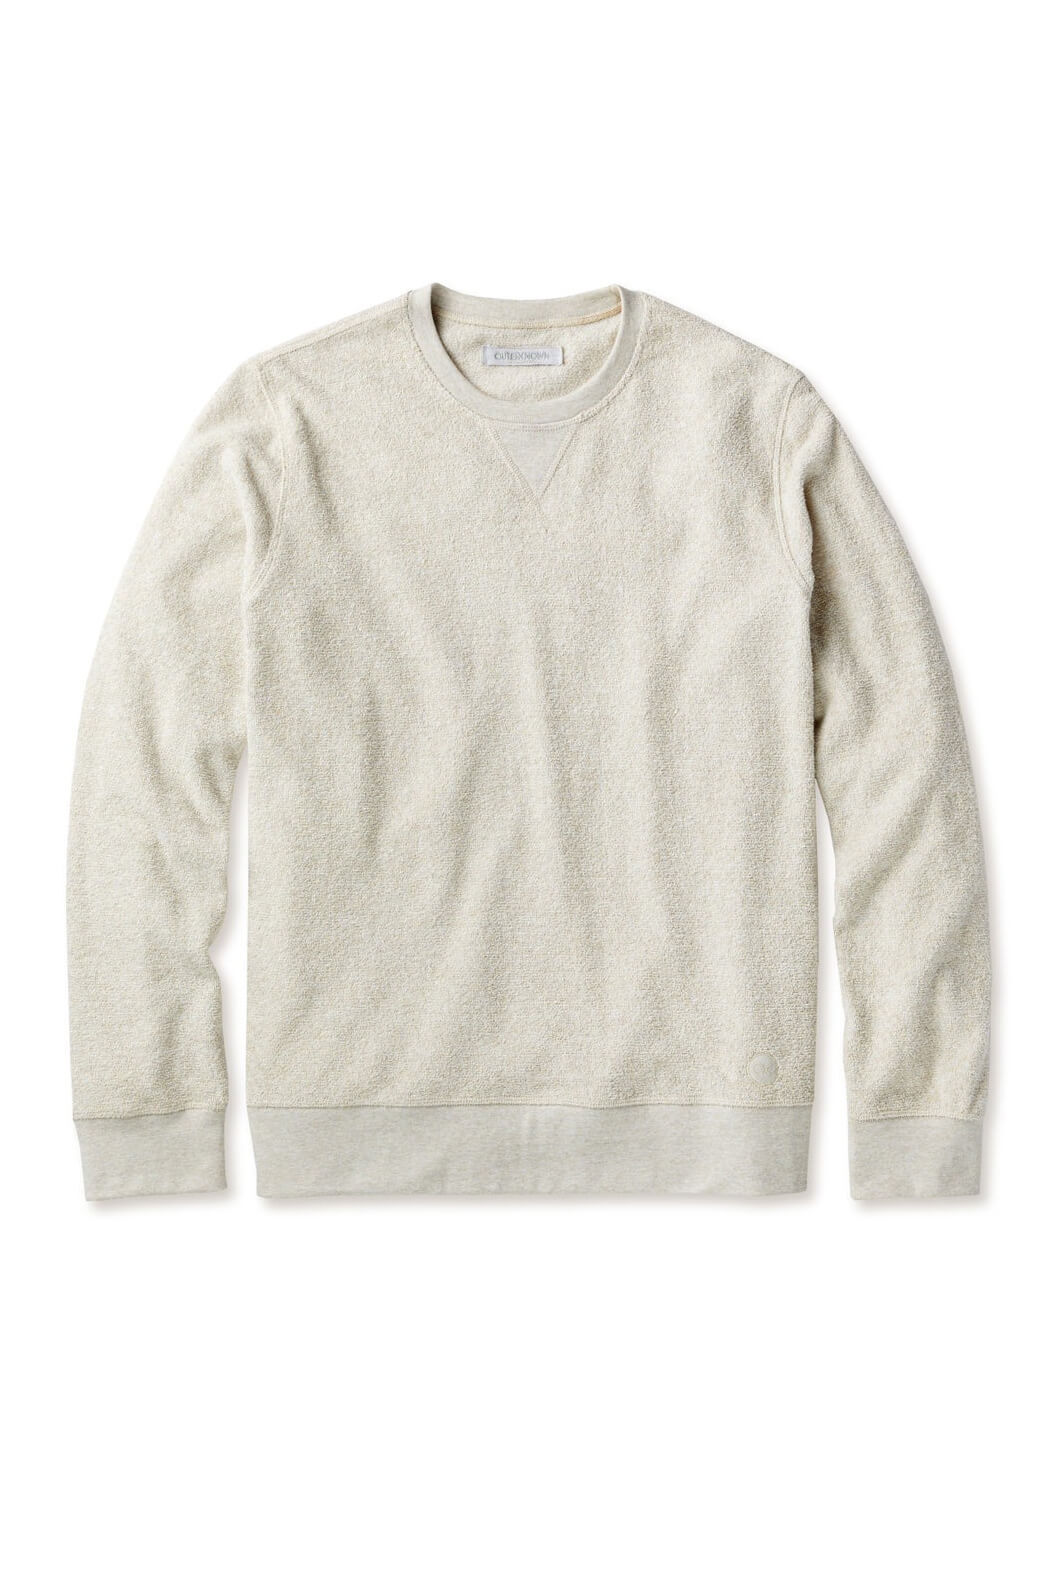 Outerknown hightide crew in oatmeal heather